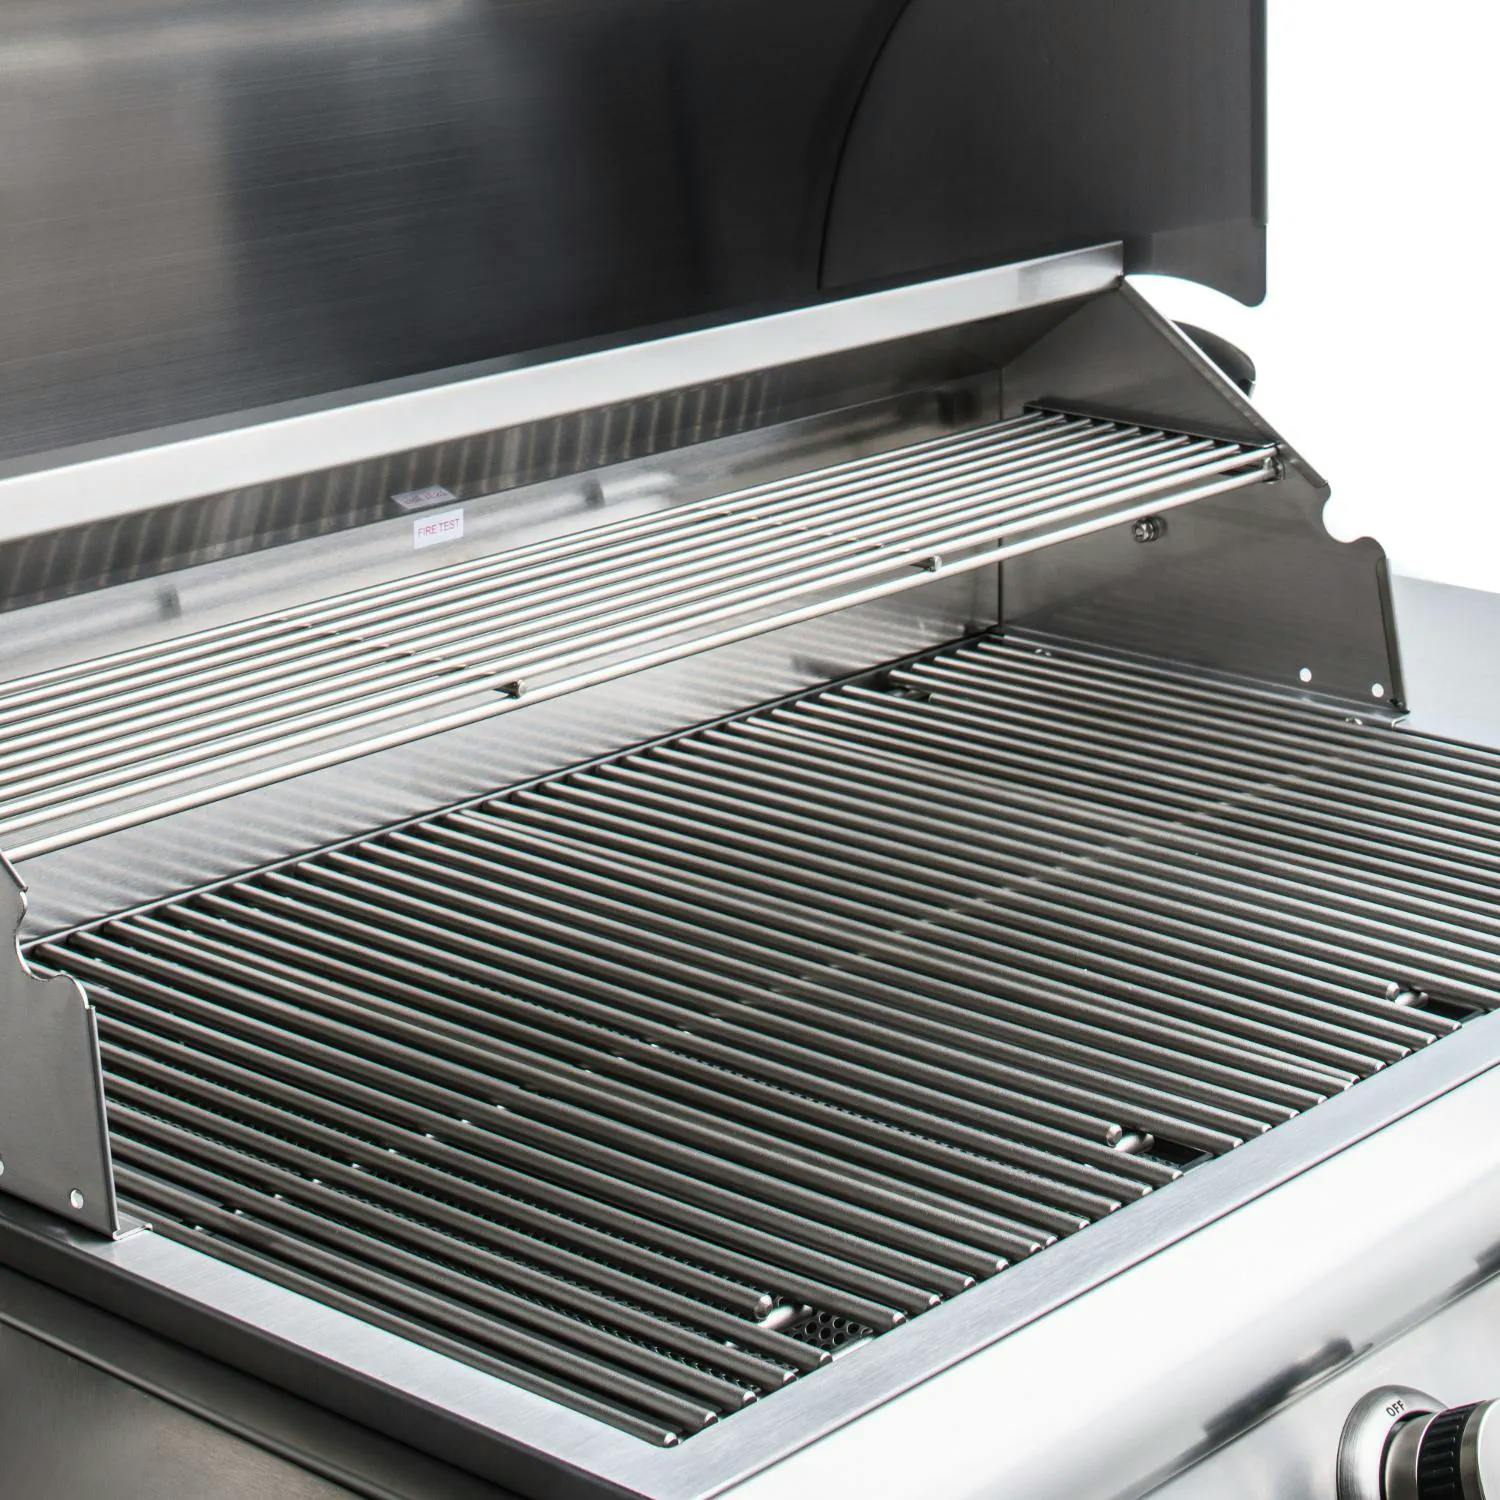 Blaze Prelude LBM Built-In Gas Grill